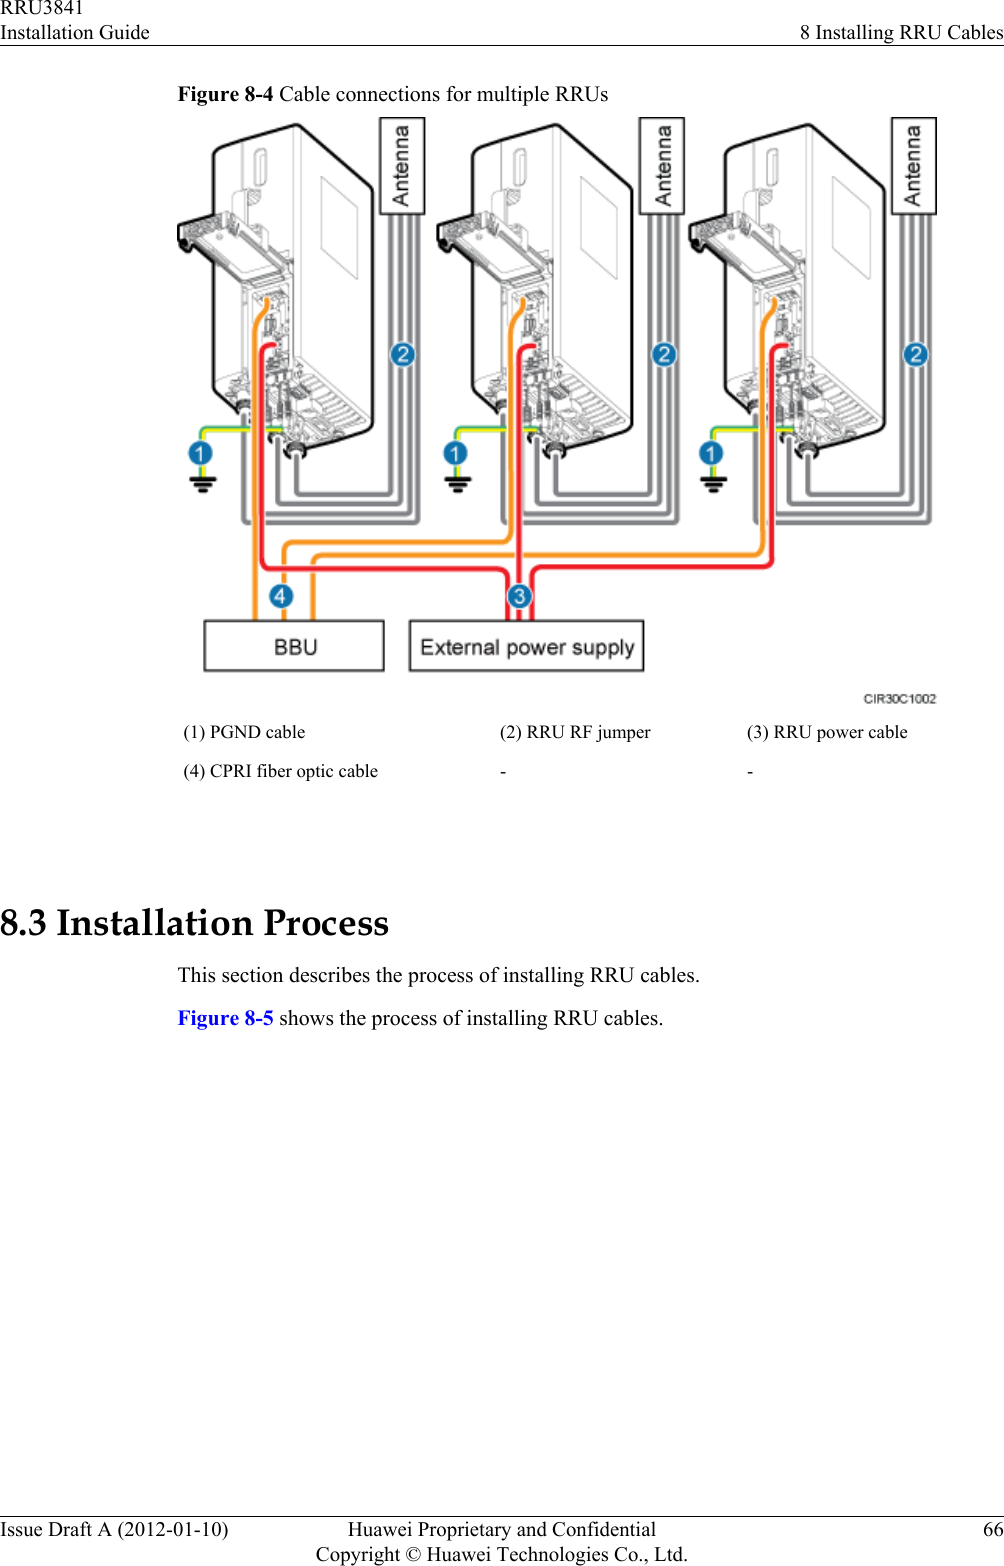 Figure 8-4 Cable connections for multiple RRUs(1) PGND cable (2) RRU RF jumper (3) RRU power cable(4) CPRI fiber optic cable - - 8.3 Installation ProcessThis section describes the process of installing RRU cables.Figure 8-5 shows the process of installing RRU cables.RRU3841Installation Guide 8 Installing RRU CablesIssue Draft A (2012-01-10) Huawei Proprietary and ConfidentialCopyright © Huawei Technologies Co., Ltd.66